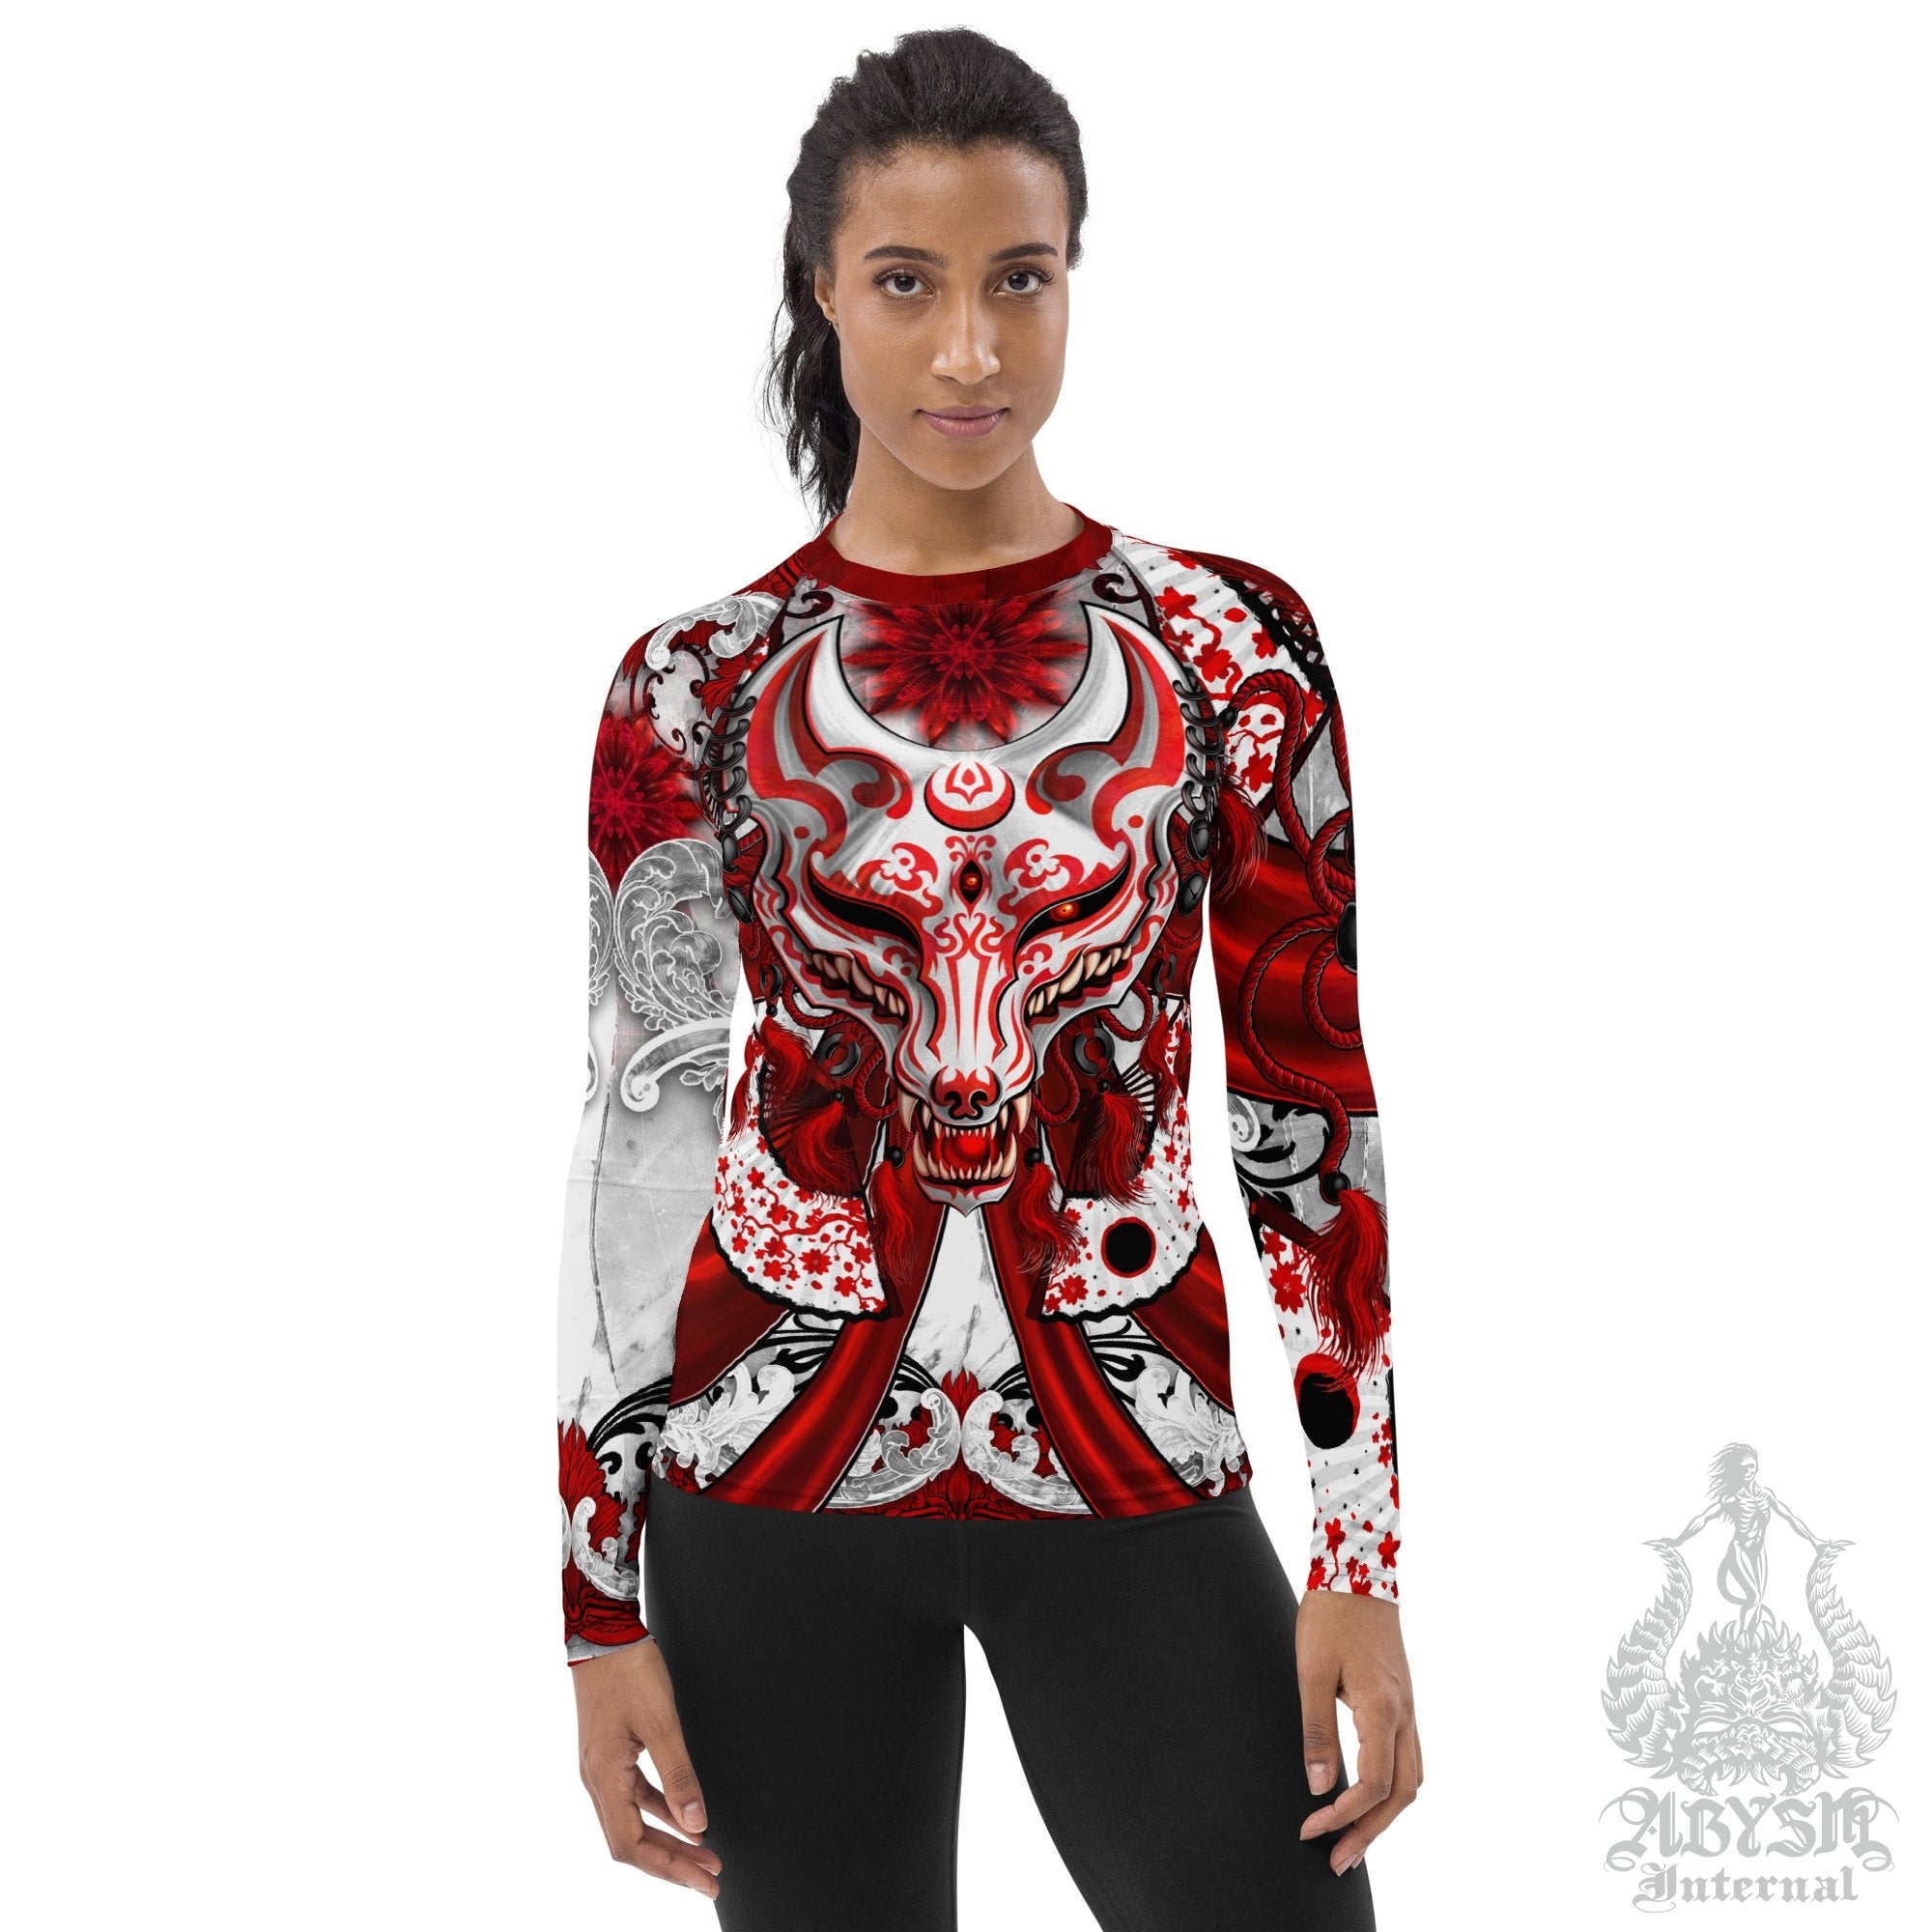 Awesome Women's Rash Guard, Long Sleeve spandex shirt for surfing, swimsuit top for water sports, Fantasy Art - Kitsune Bloody White Goth - Abysm Internal